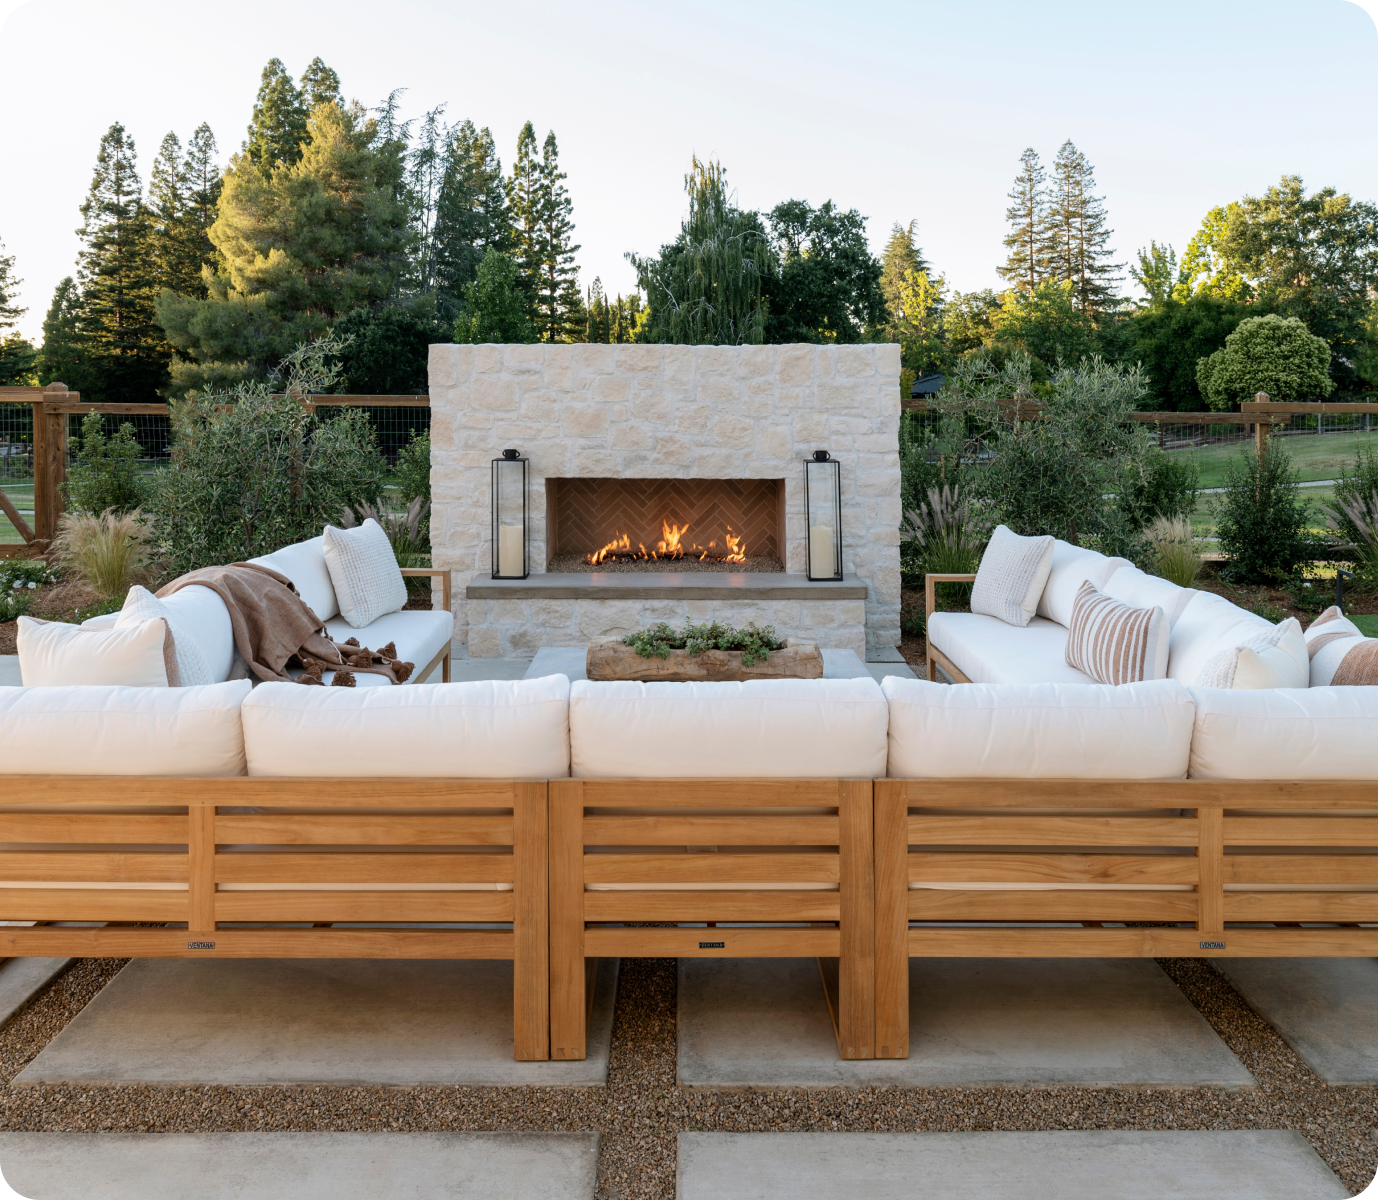 Outdoor fireplace with large sectional in golden hour.